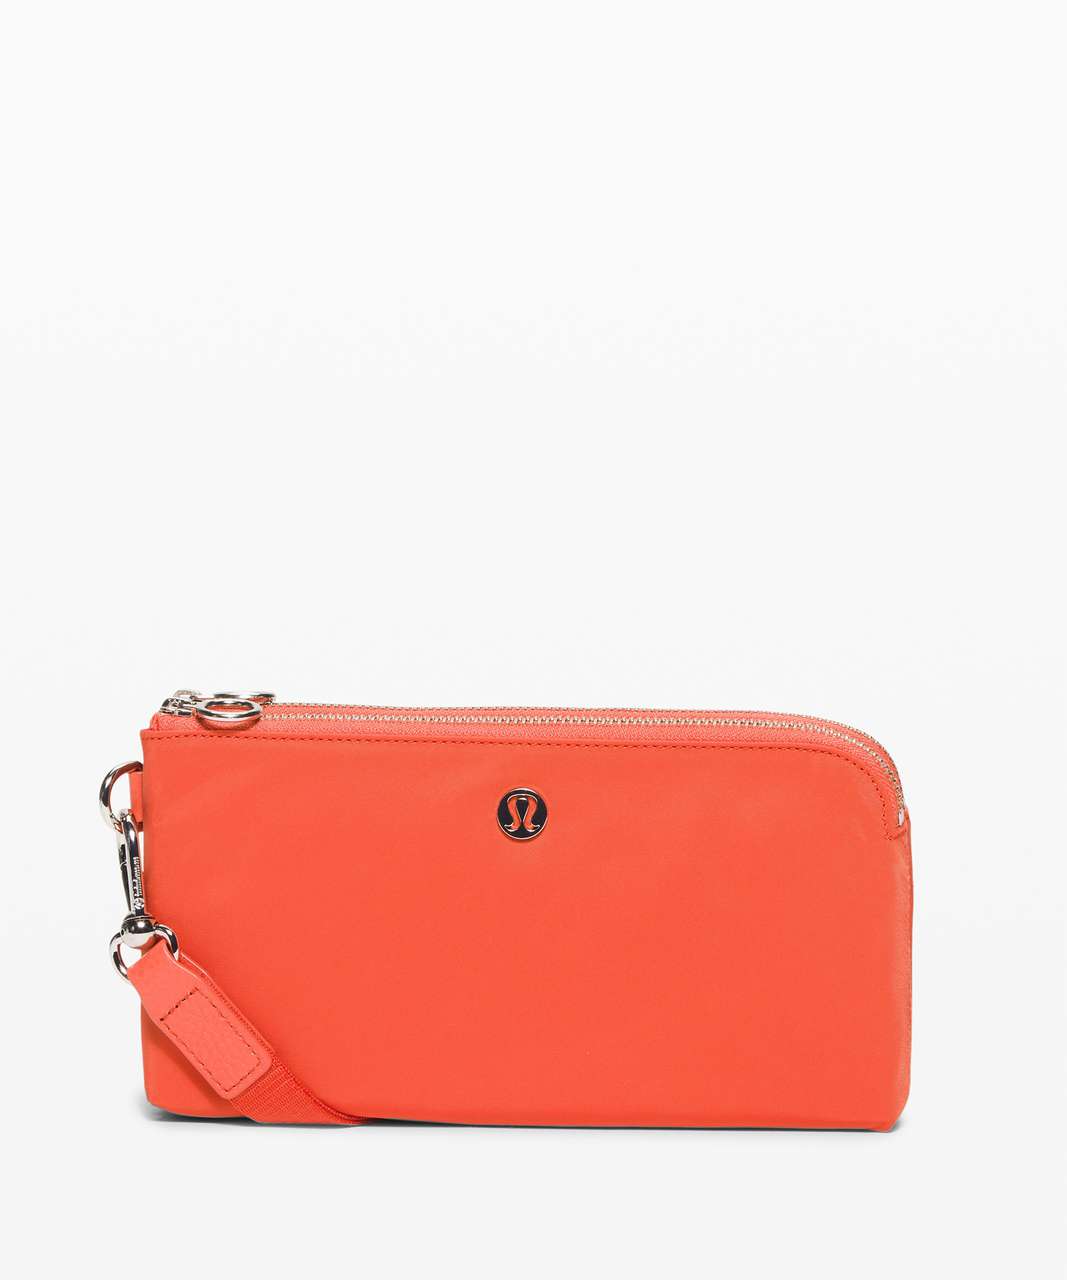 Lululemon Now and Always Pouch - Brick